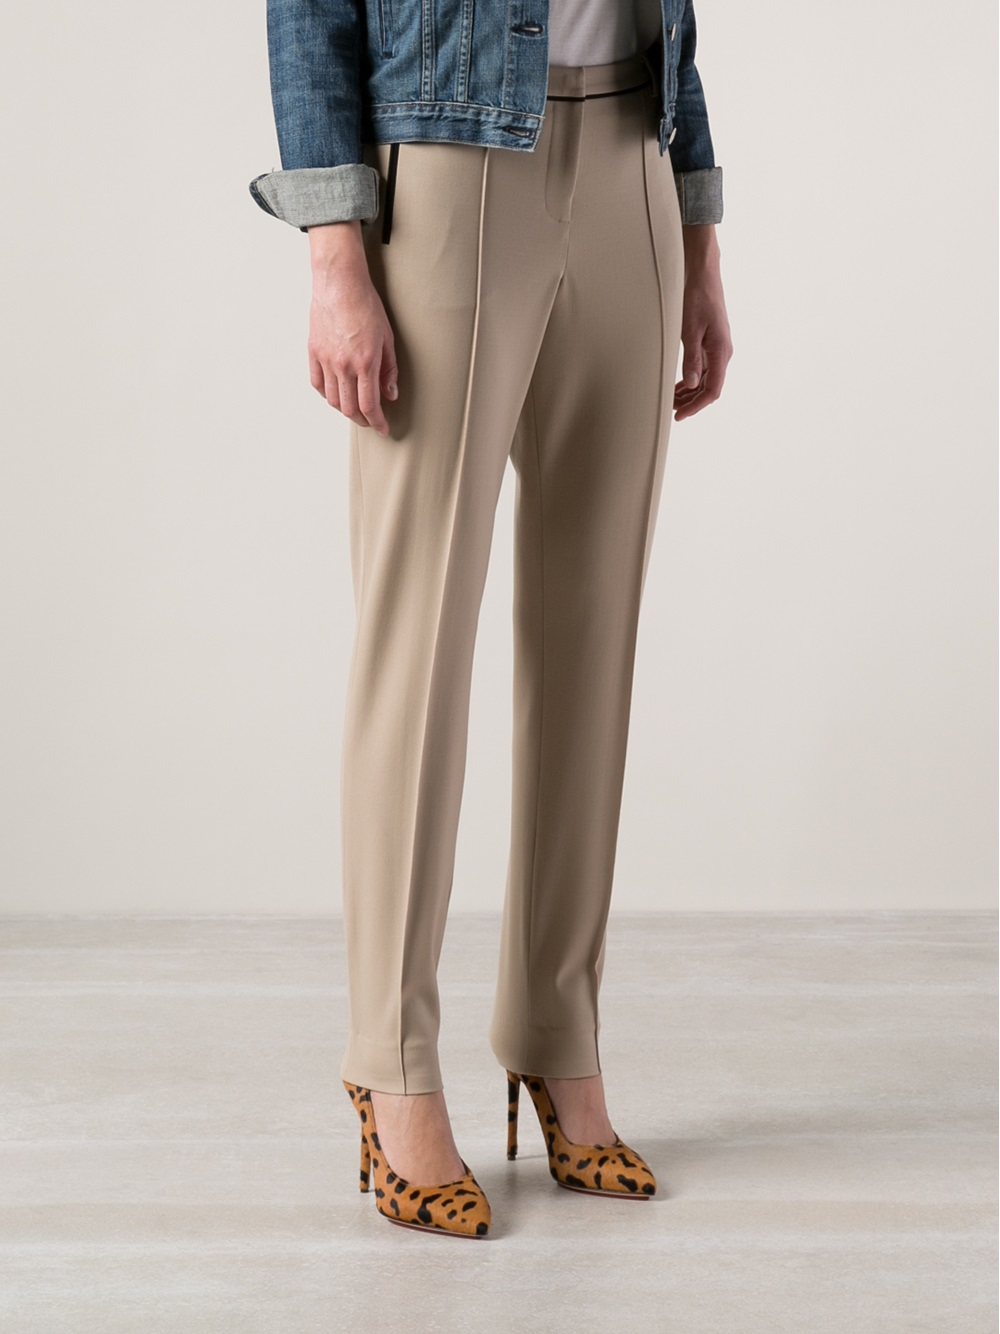 Lyst - Jason Wu Stovepipe Trousers in Brown